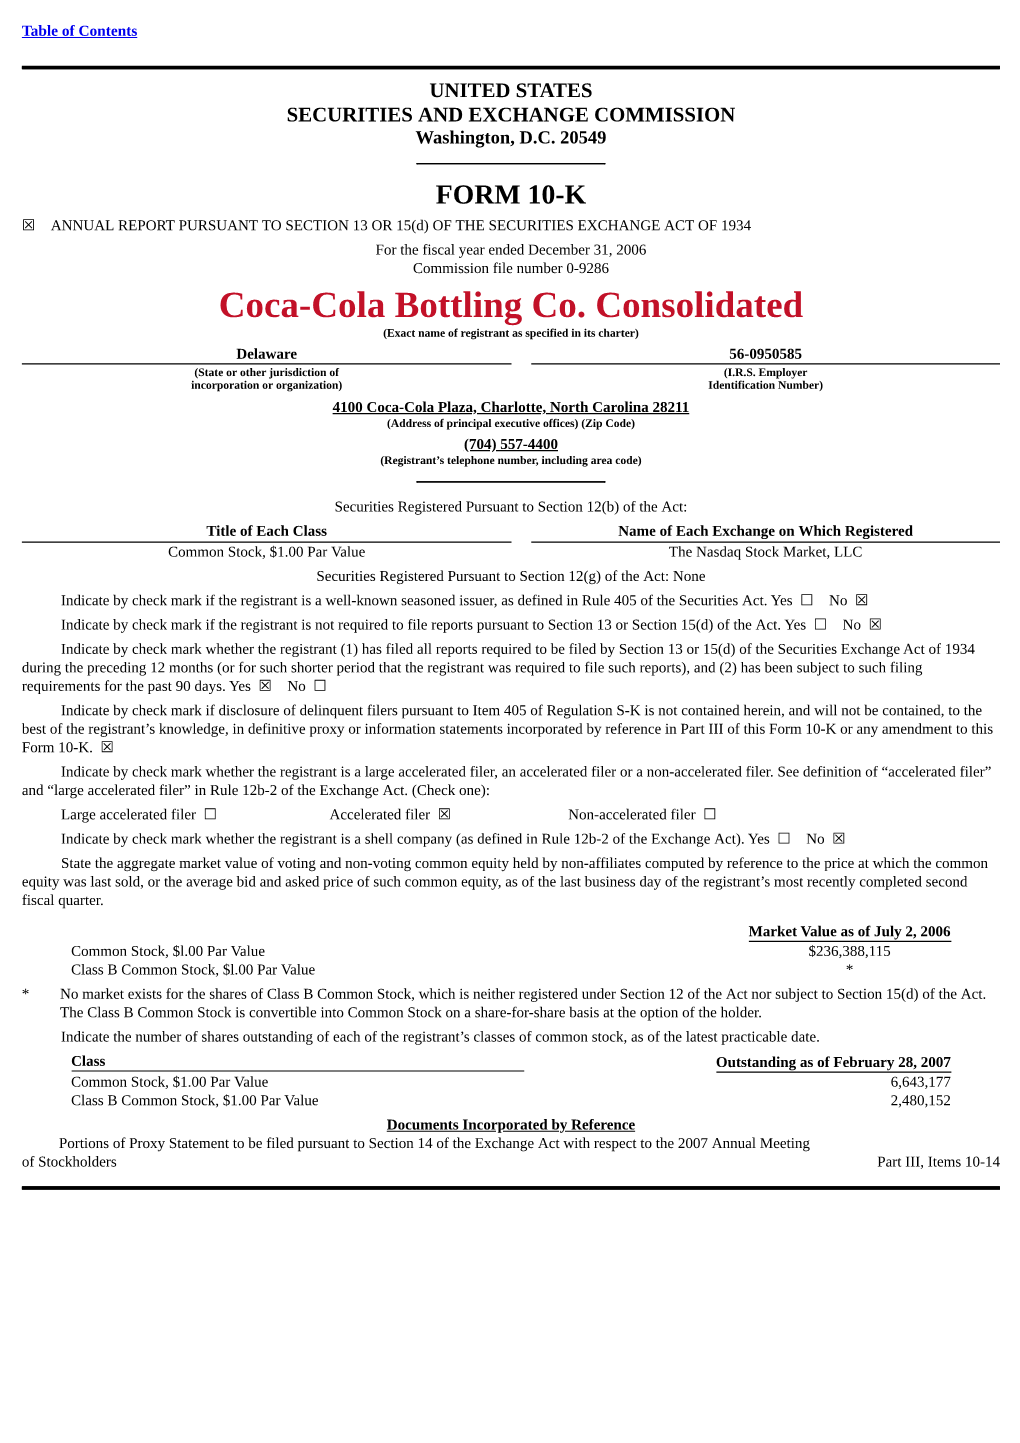 Coca-Cola Bottling Co. Consolidated (Exact Name of Registrant As Specified in Its Charter)